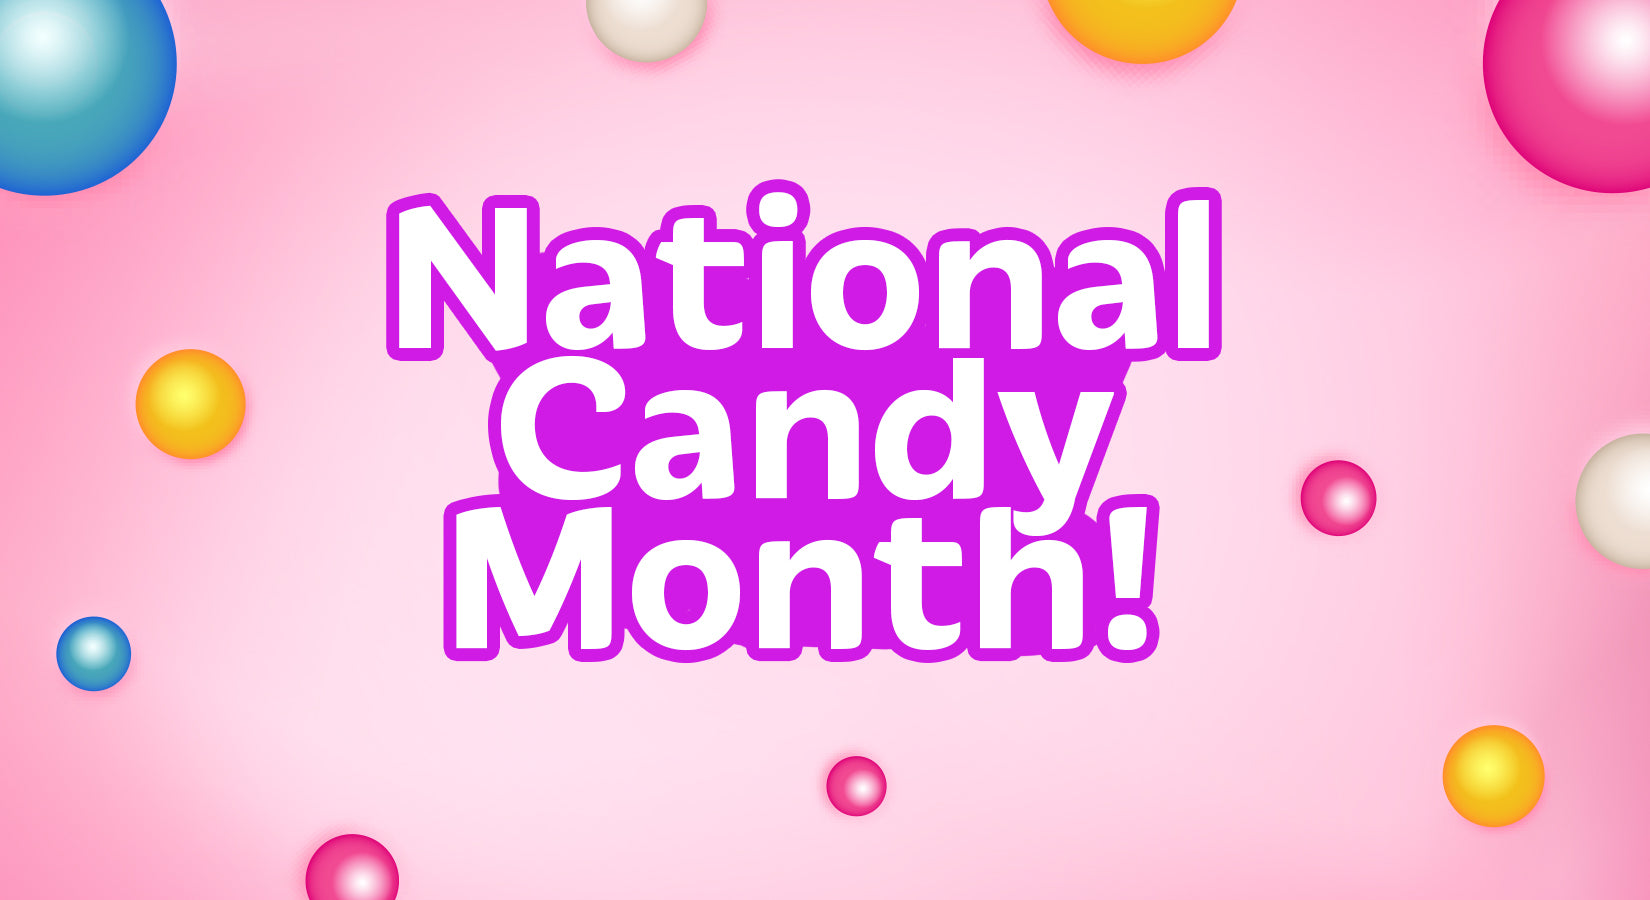 June is National Candy Month - This is how your store can celebrate National Candy Month iwholesalecandy.ca